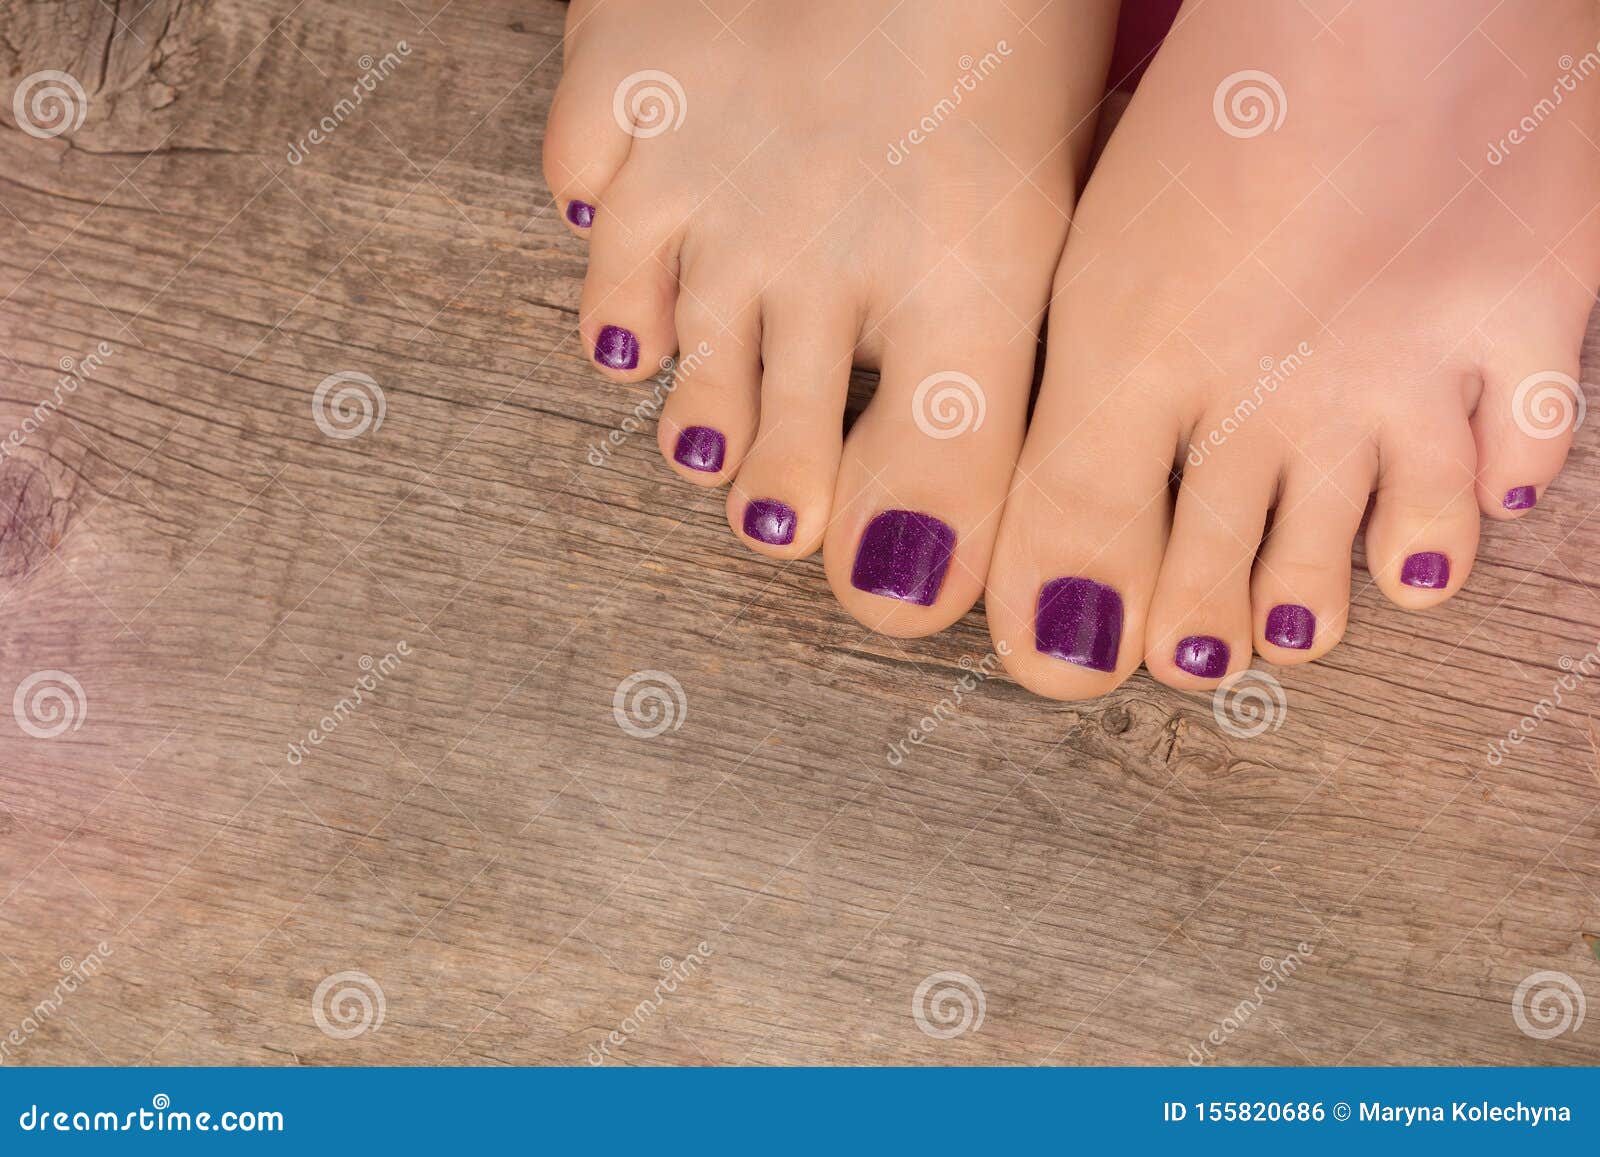 Beautiful Female Feet With Purple Pedicure On Wooden Background Stock